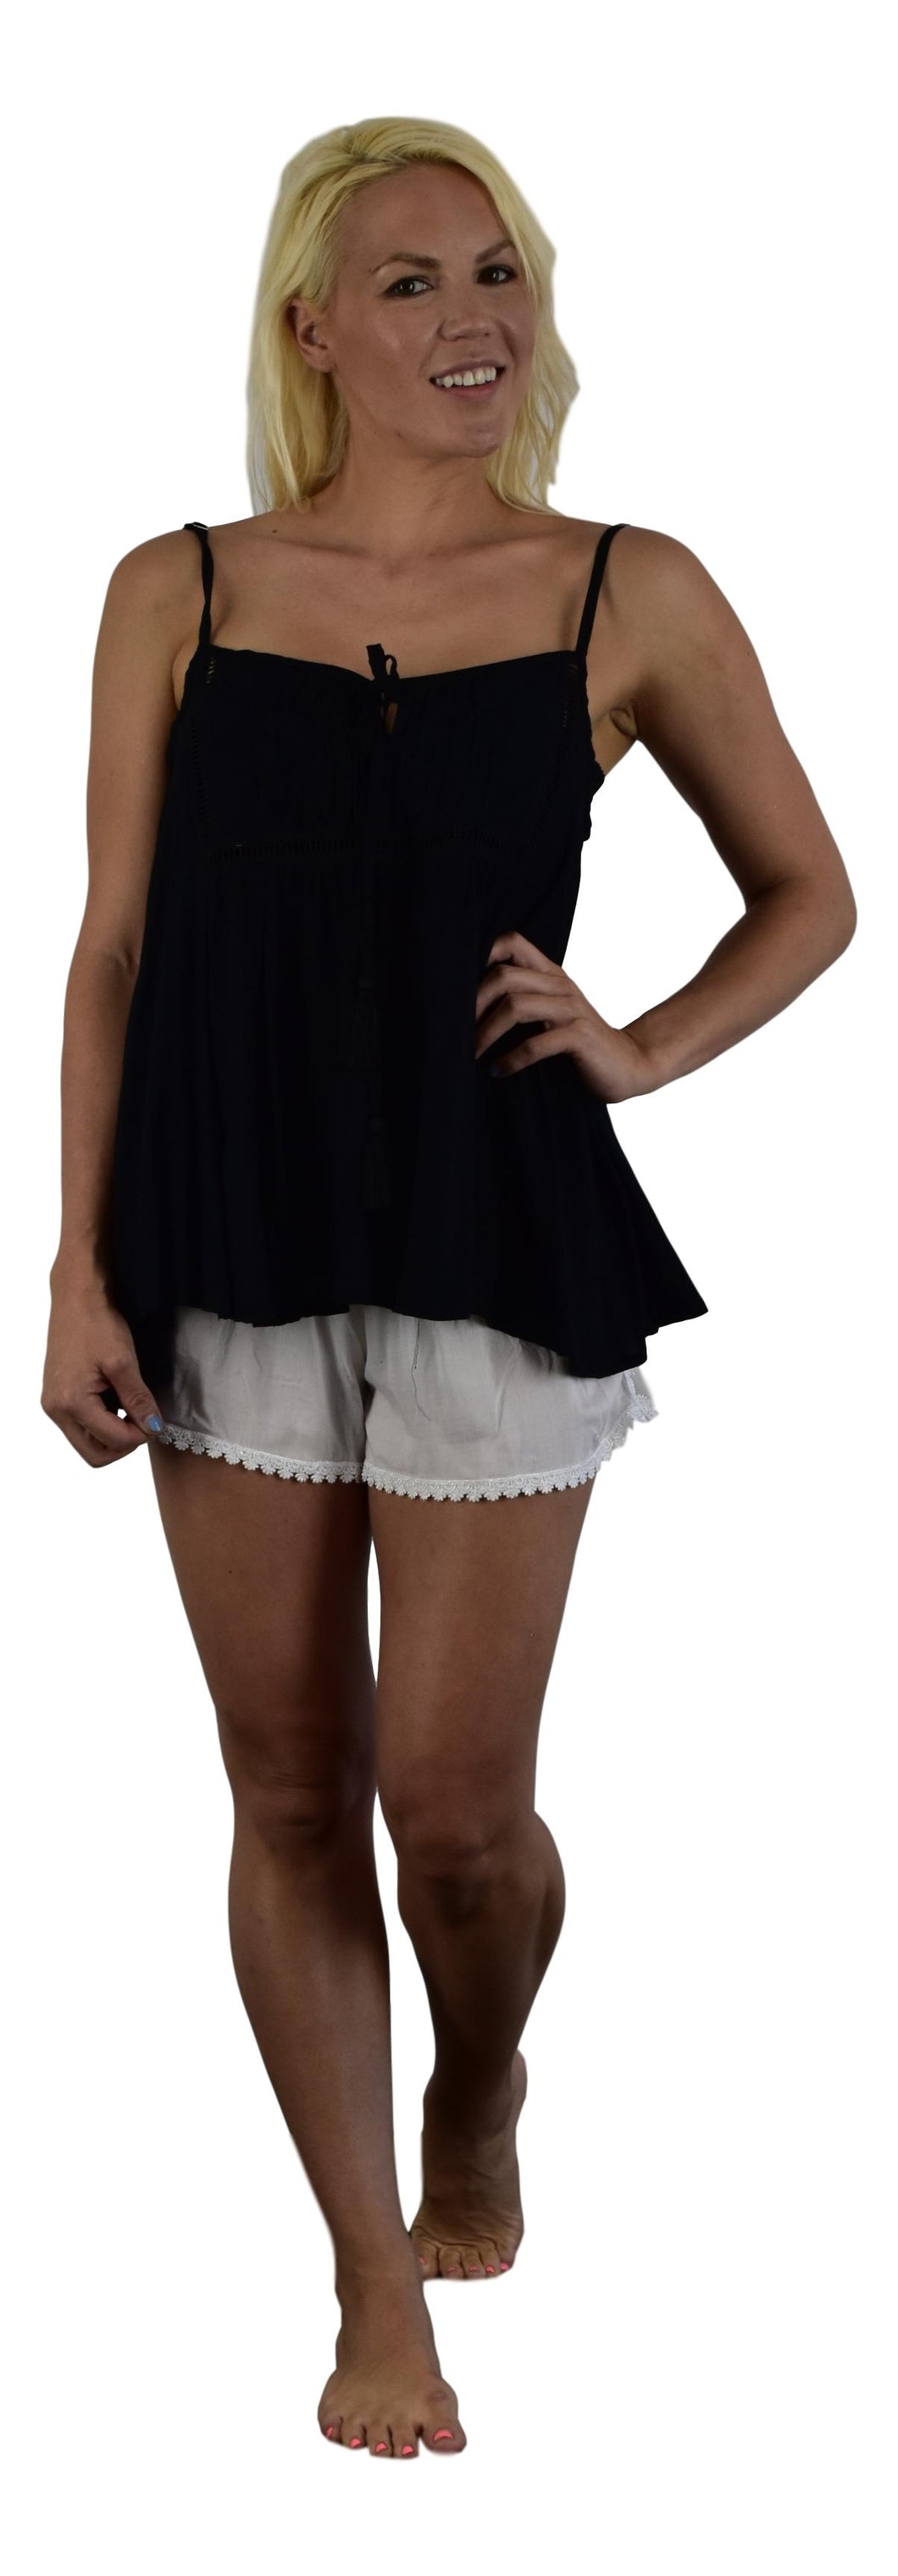 Secret Beach - Paia Top - Black  - Chiffon Rayon with tape and tassels on tie